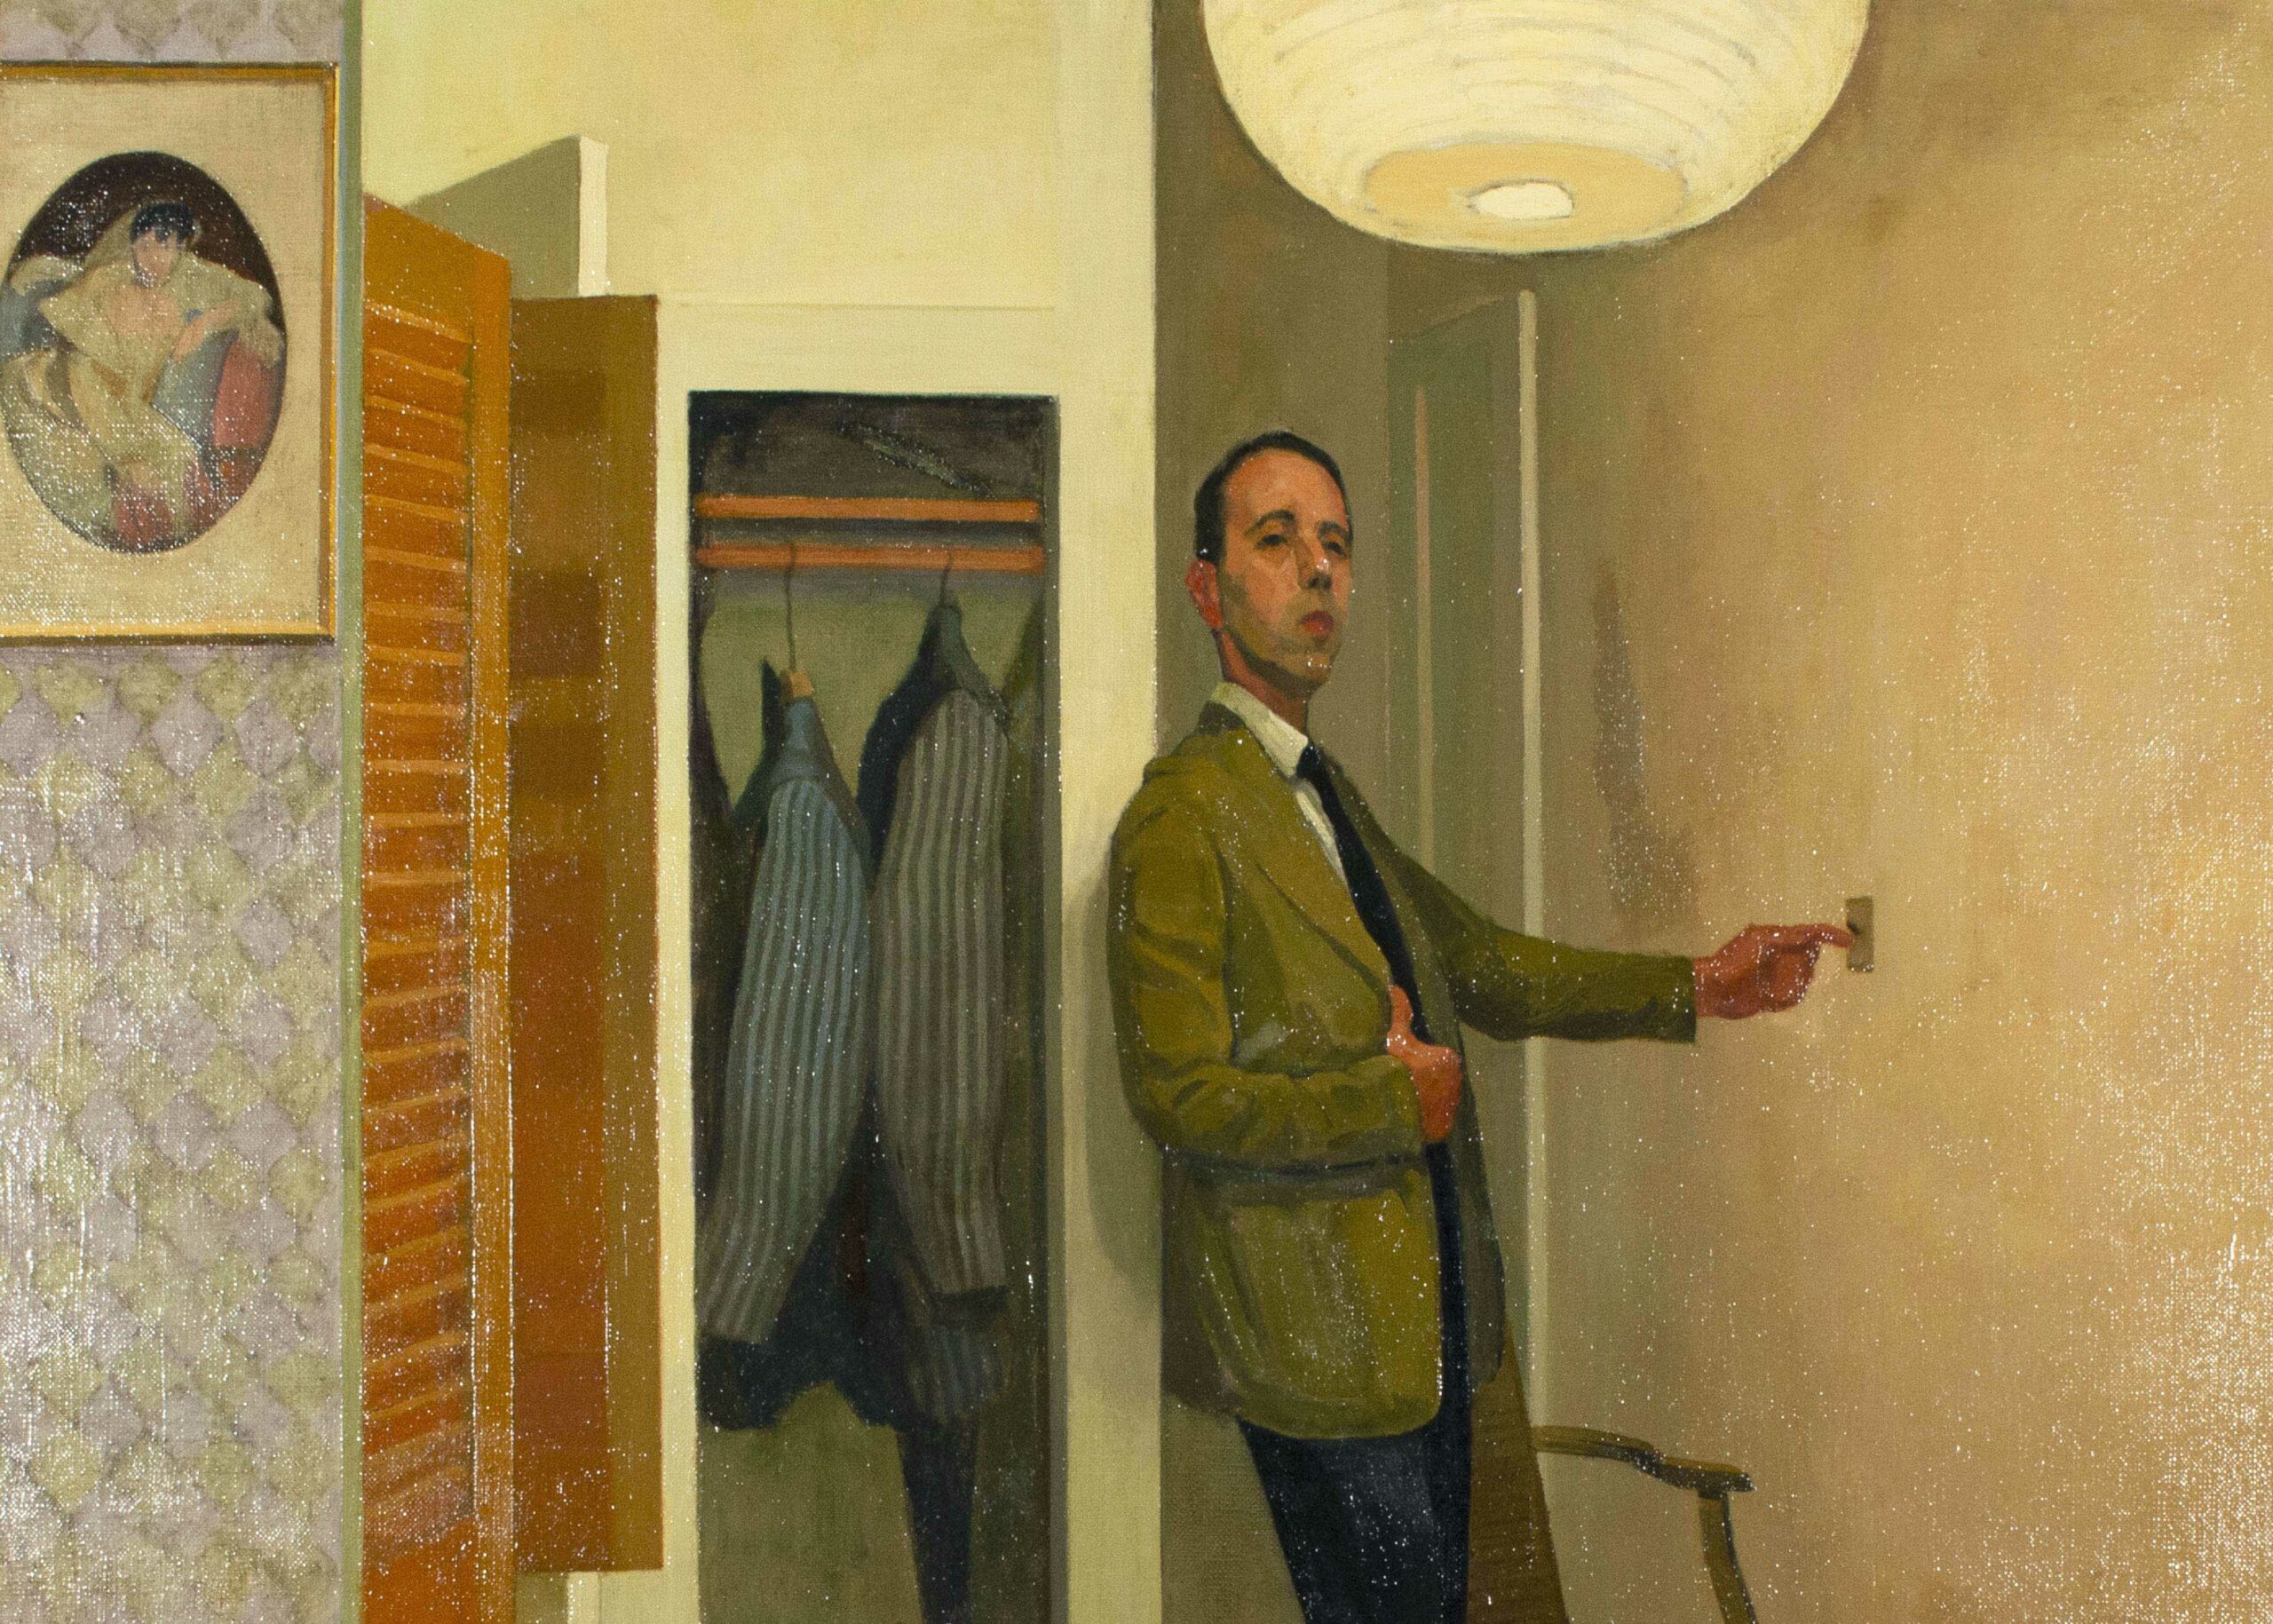 Painting of a man in a brown suit jacket, leaning against a closet wall with one hand at his coat and the other reaching out to turn off a light switch. He is looking at the audience. A round paper light hangs from the ceiling, suits are hanging in the closet, and there are red wood shutters half open to the far right.